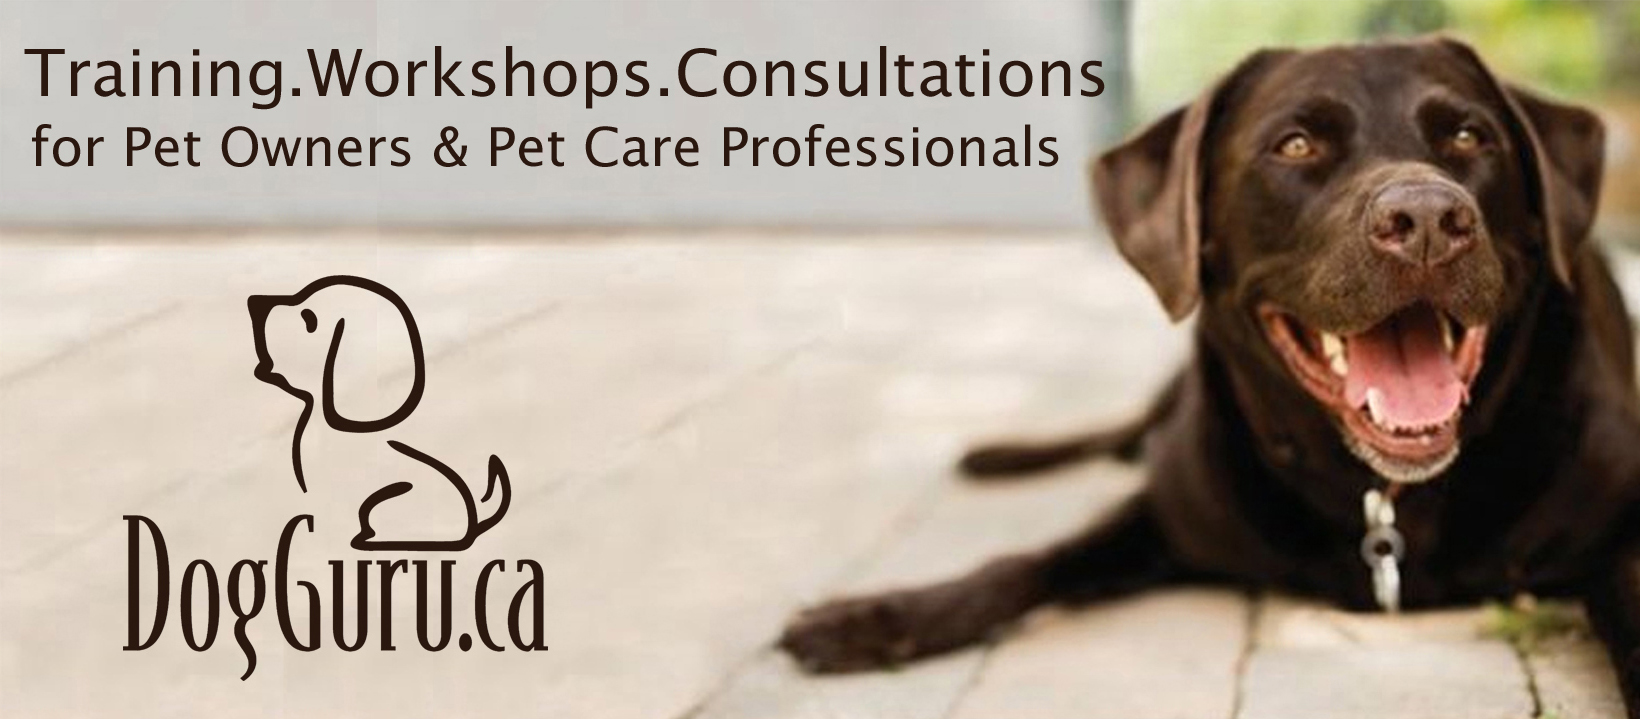 DogGuru - Behaviour Workshops and Training for Pet Owners and Pet Care  Professionals, in Thornhill, Richmond Hill, Toronto, Ontario, Canada